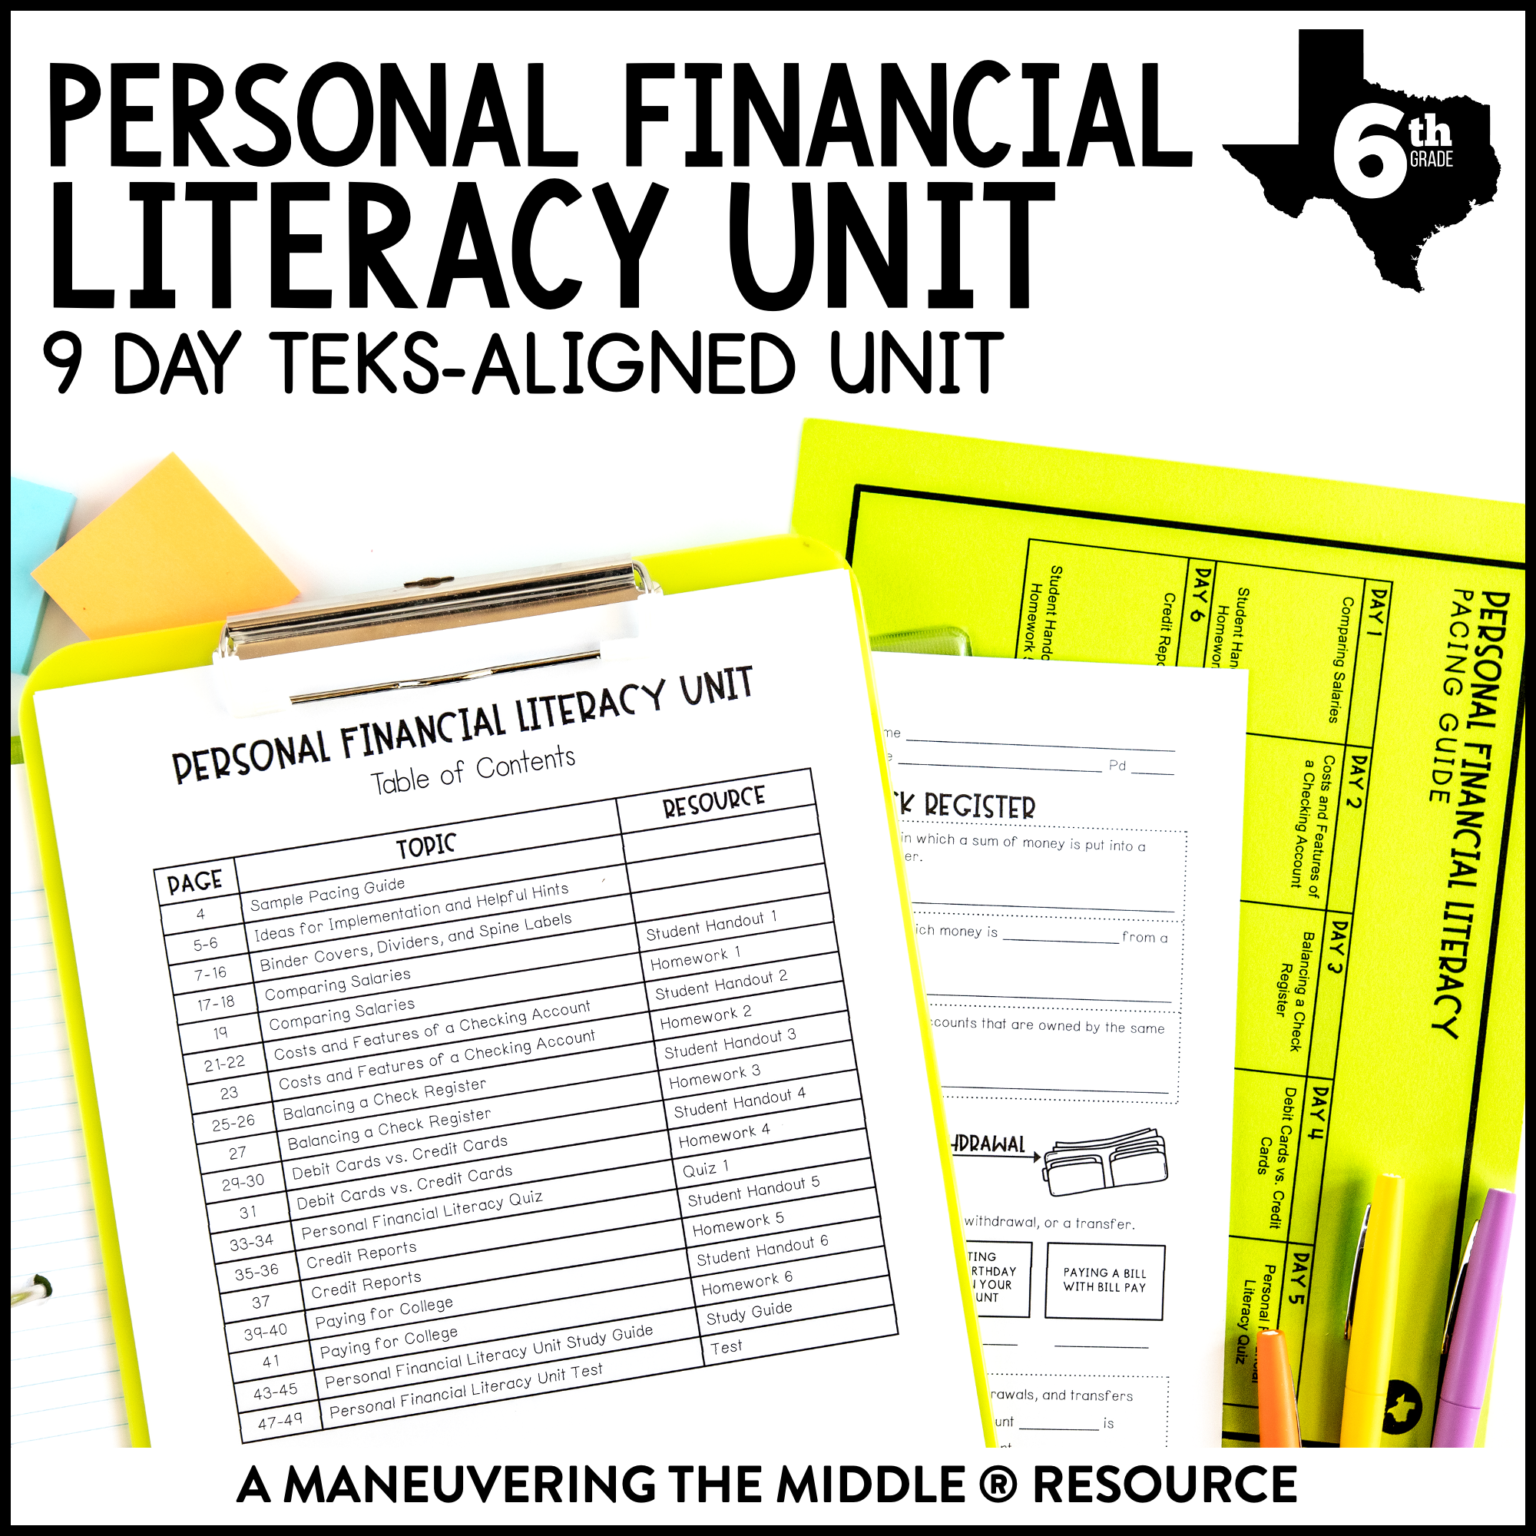 personal-financial-literacy-unit-6th-grade-teks-maneuvering-the-middle